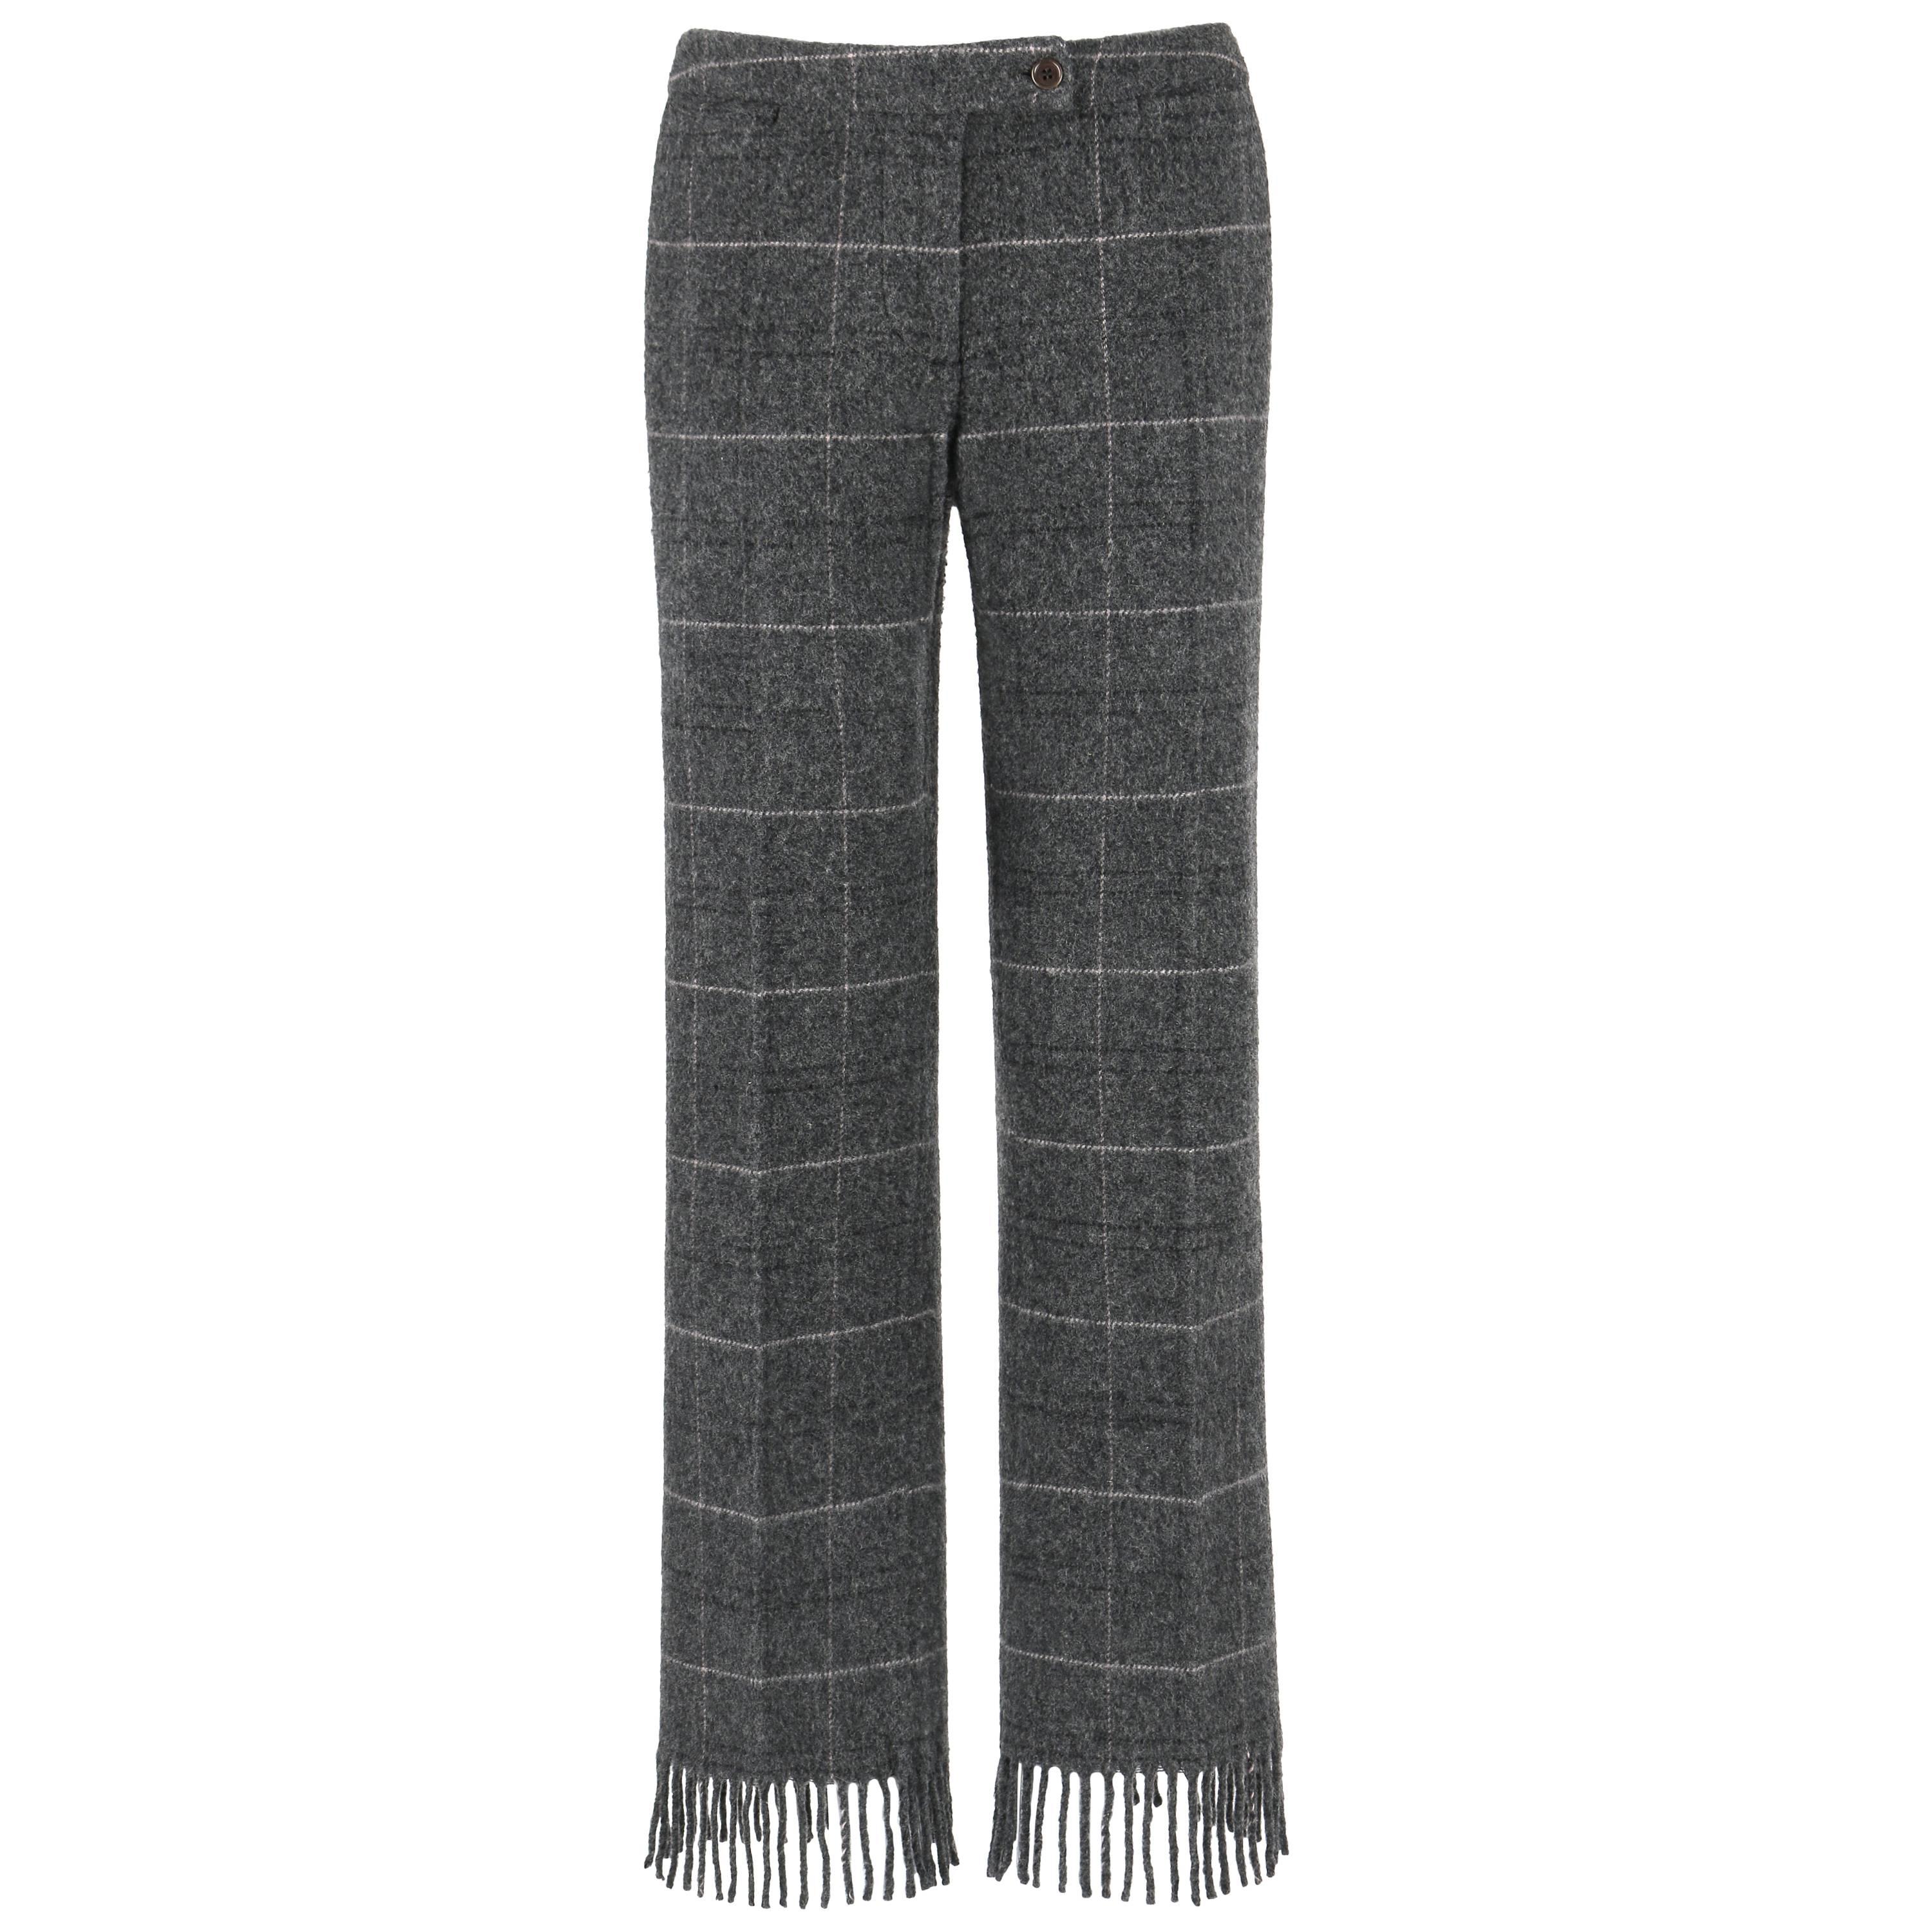 ALEXANDER McQUEEN A/W 1999 "The Overlook" Gray Wool Check Fringe Cuff Pants